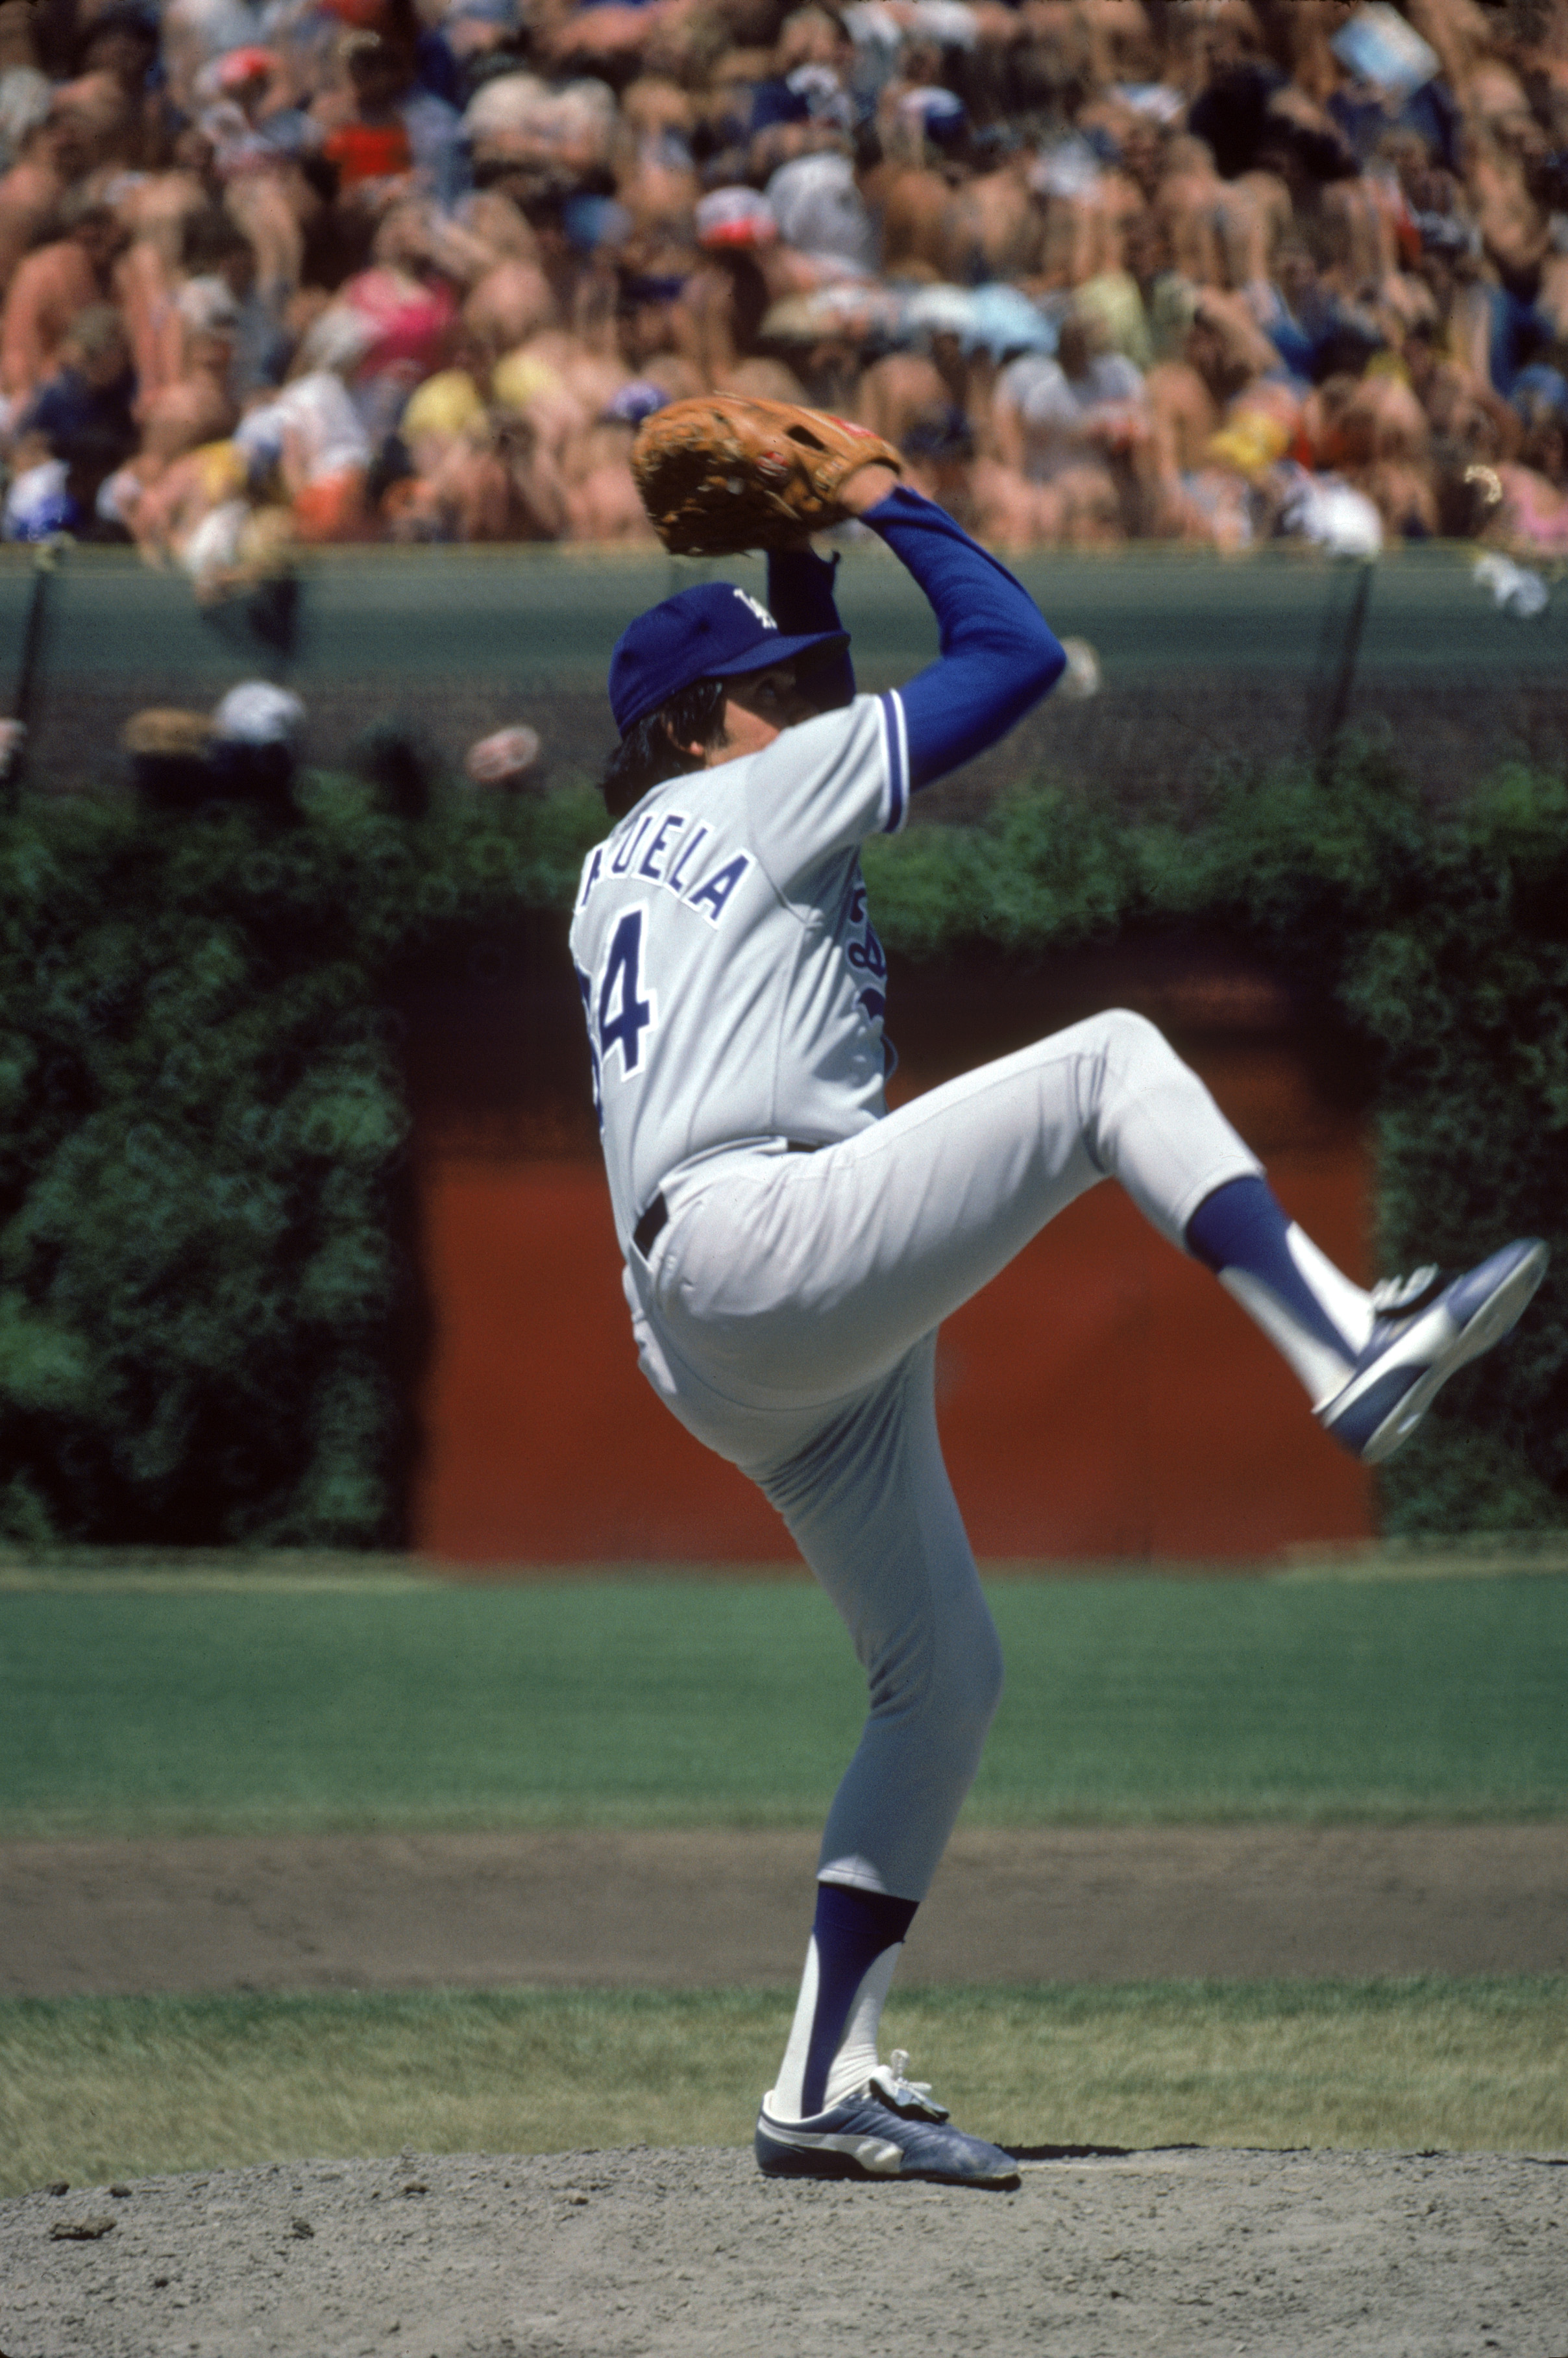 CHICAGO, IL - JUNE 6: Pitcher Fernando Valenzuela #34 of the Los Angeles Dodgers winds up for a pitch against the Chicago Cubs on June 6, 1981 at Wrigley Field in Chicago, Illinois. (Photo by: Jonathan Daniel/Getty Images)